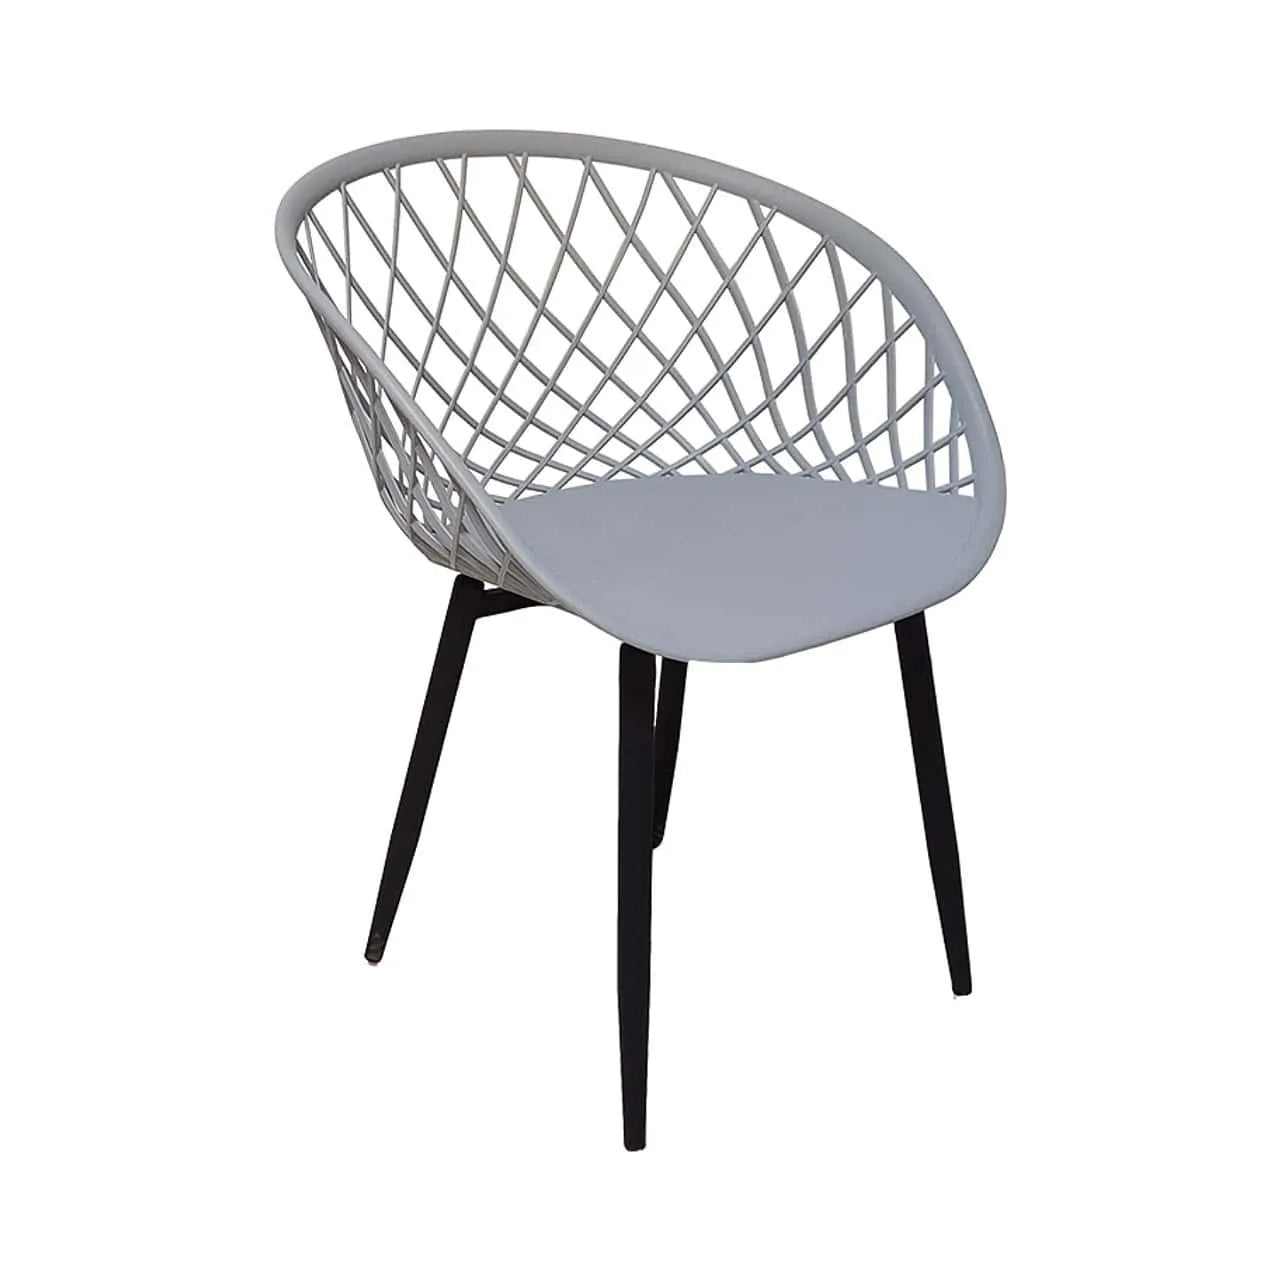 Bawas Collection Chair - Black & White